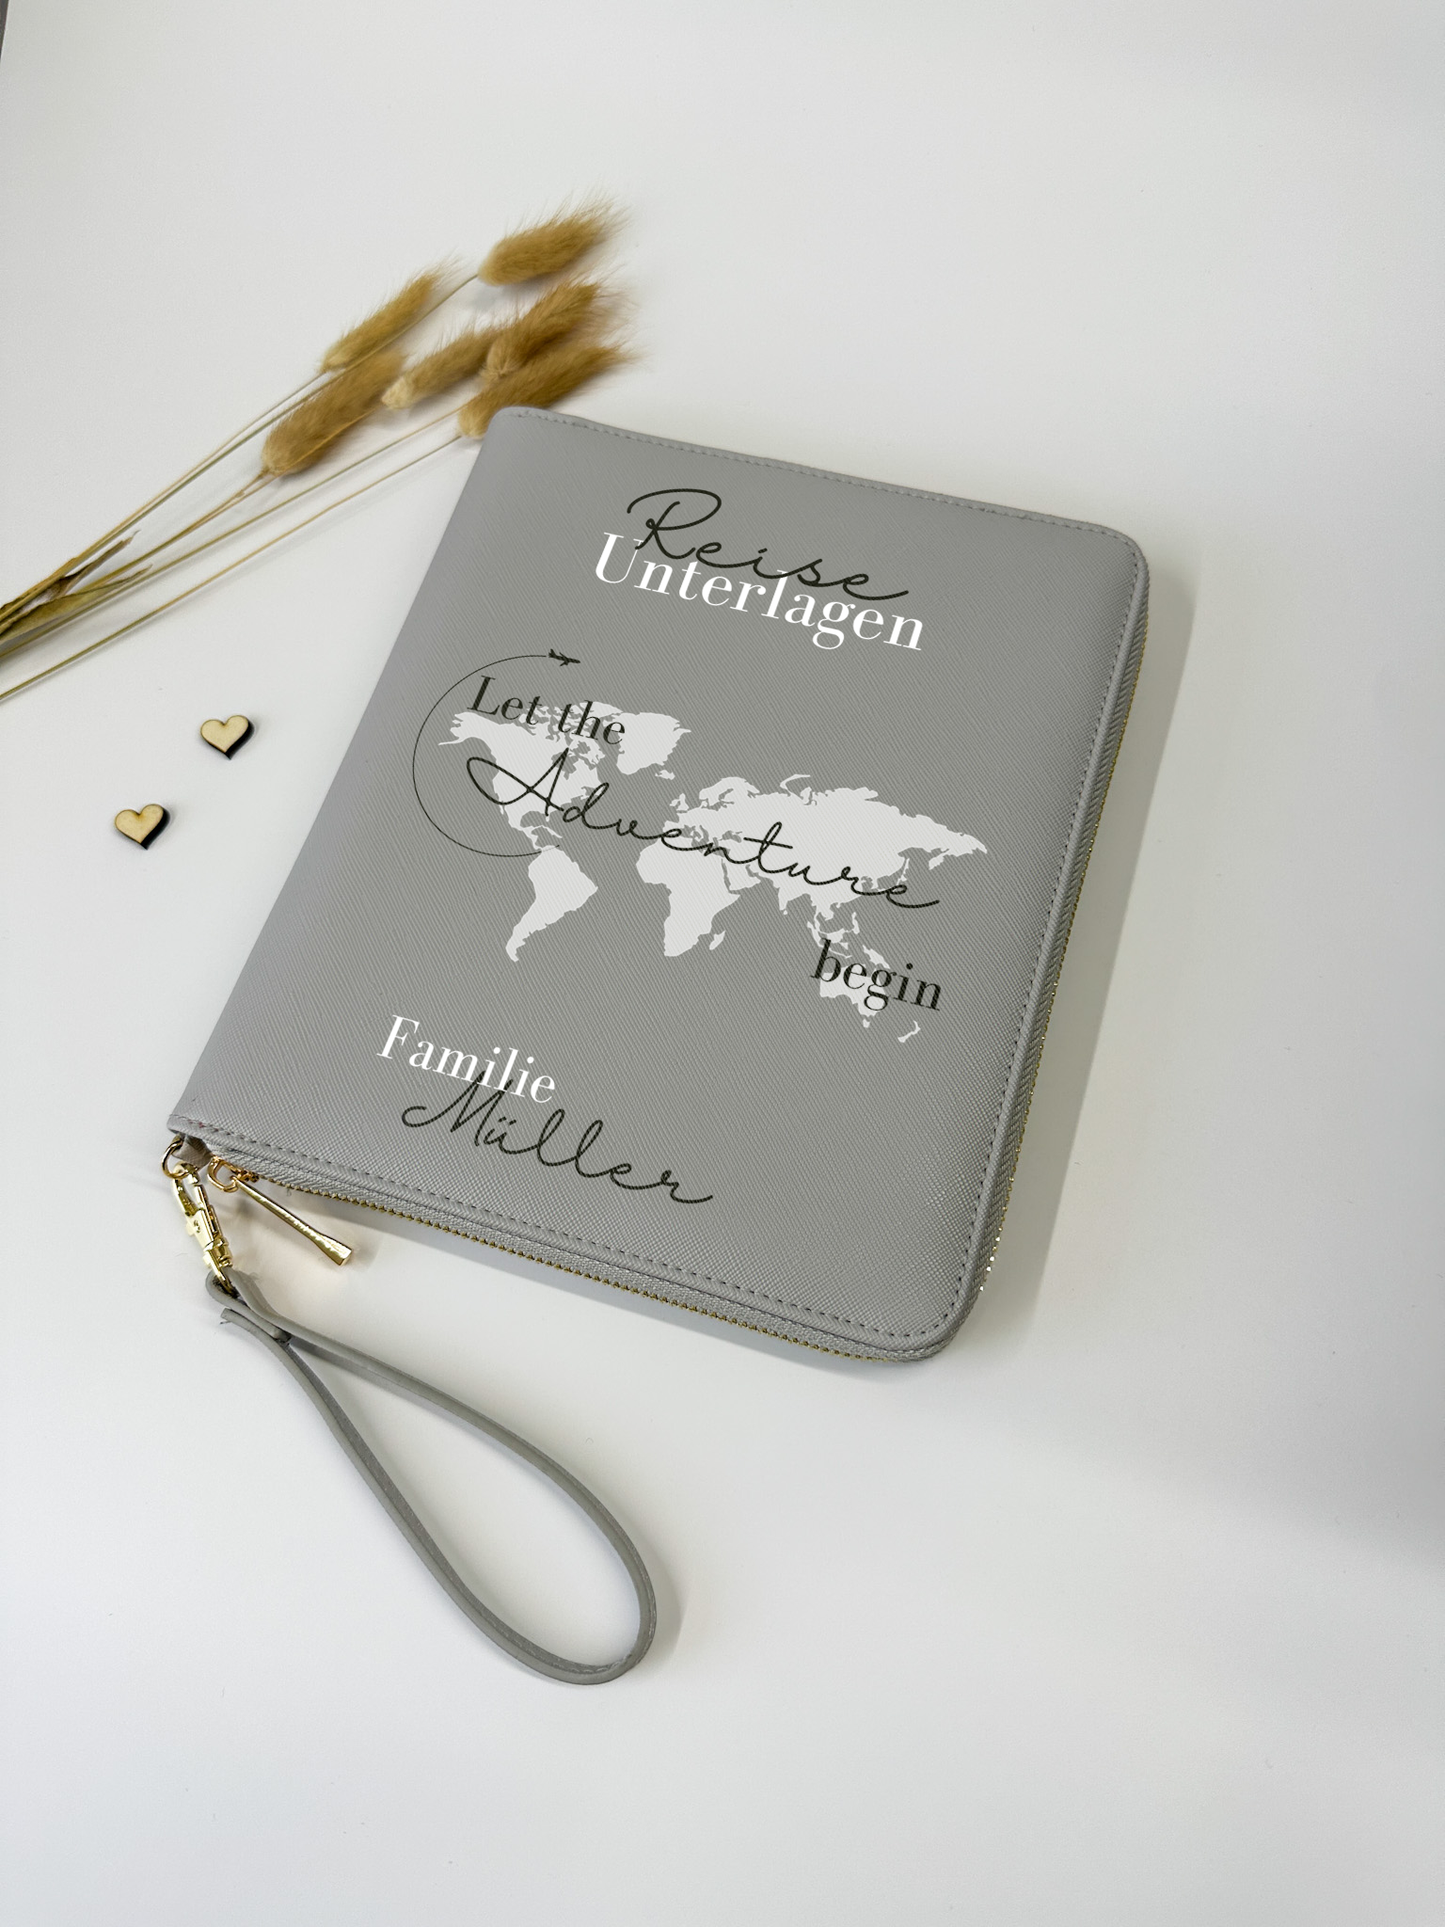 Travel organizer with name/travel organizer personalized/organizer for the bag/organizer for the family for traveling